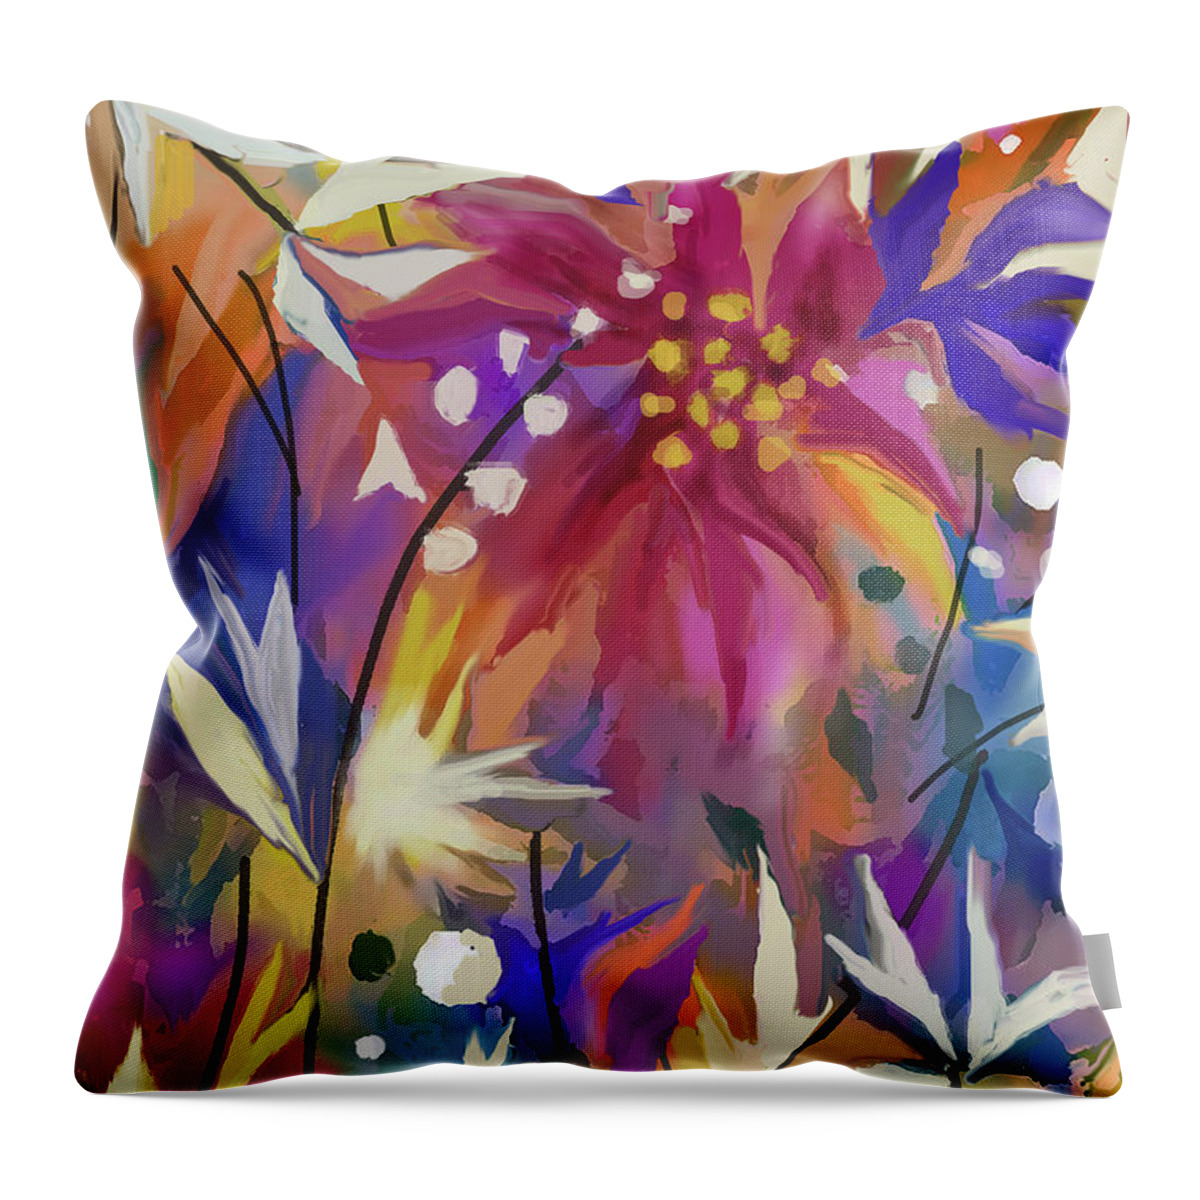 Bright Abstract Throw Pillow featuring the mixed media Abstract Bouquet by Jean Batzell Fitzgerald